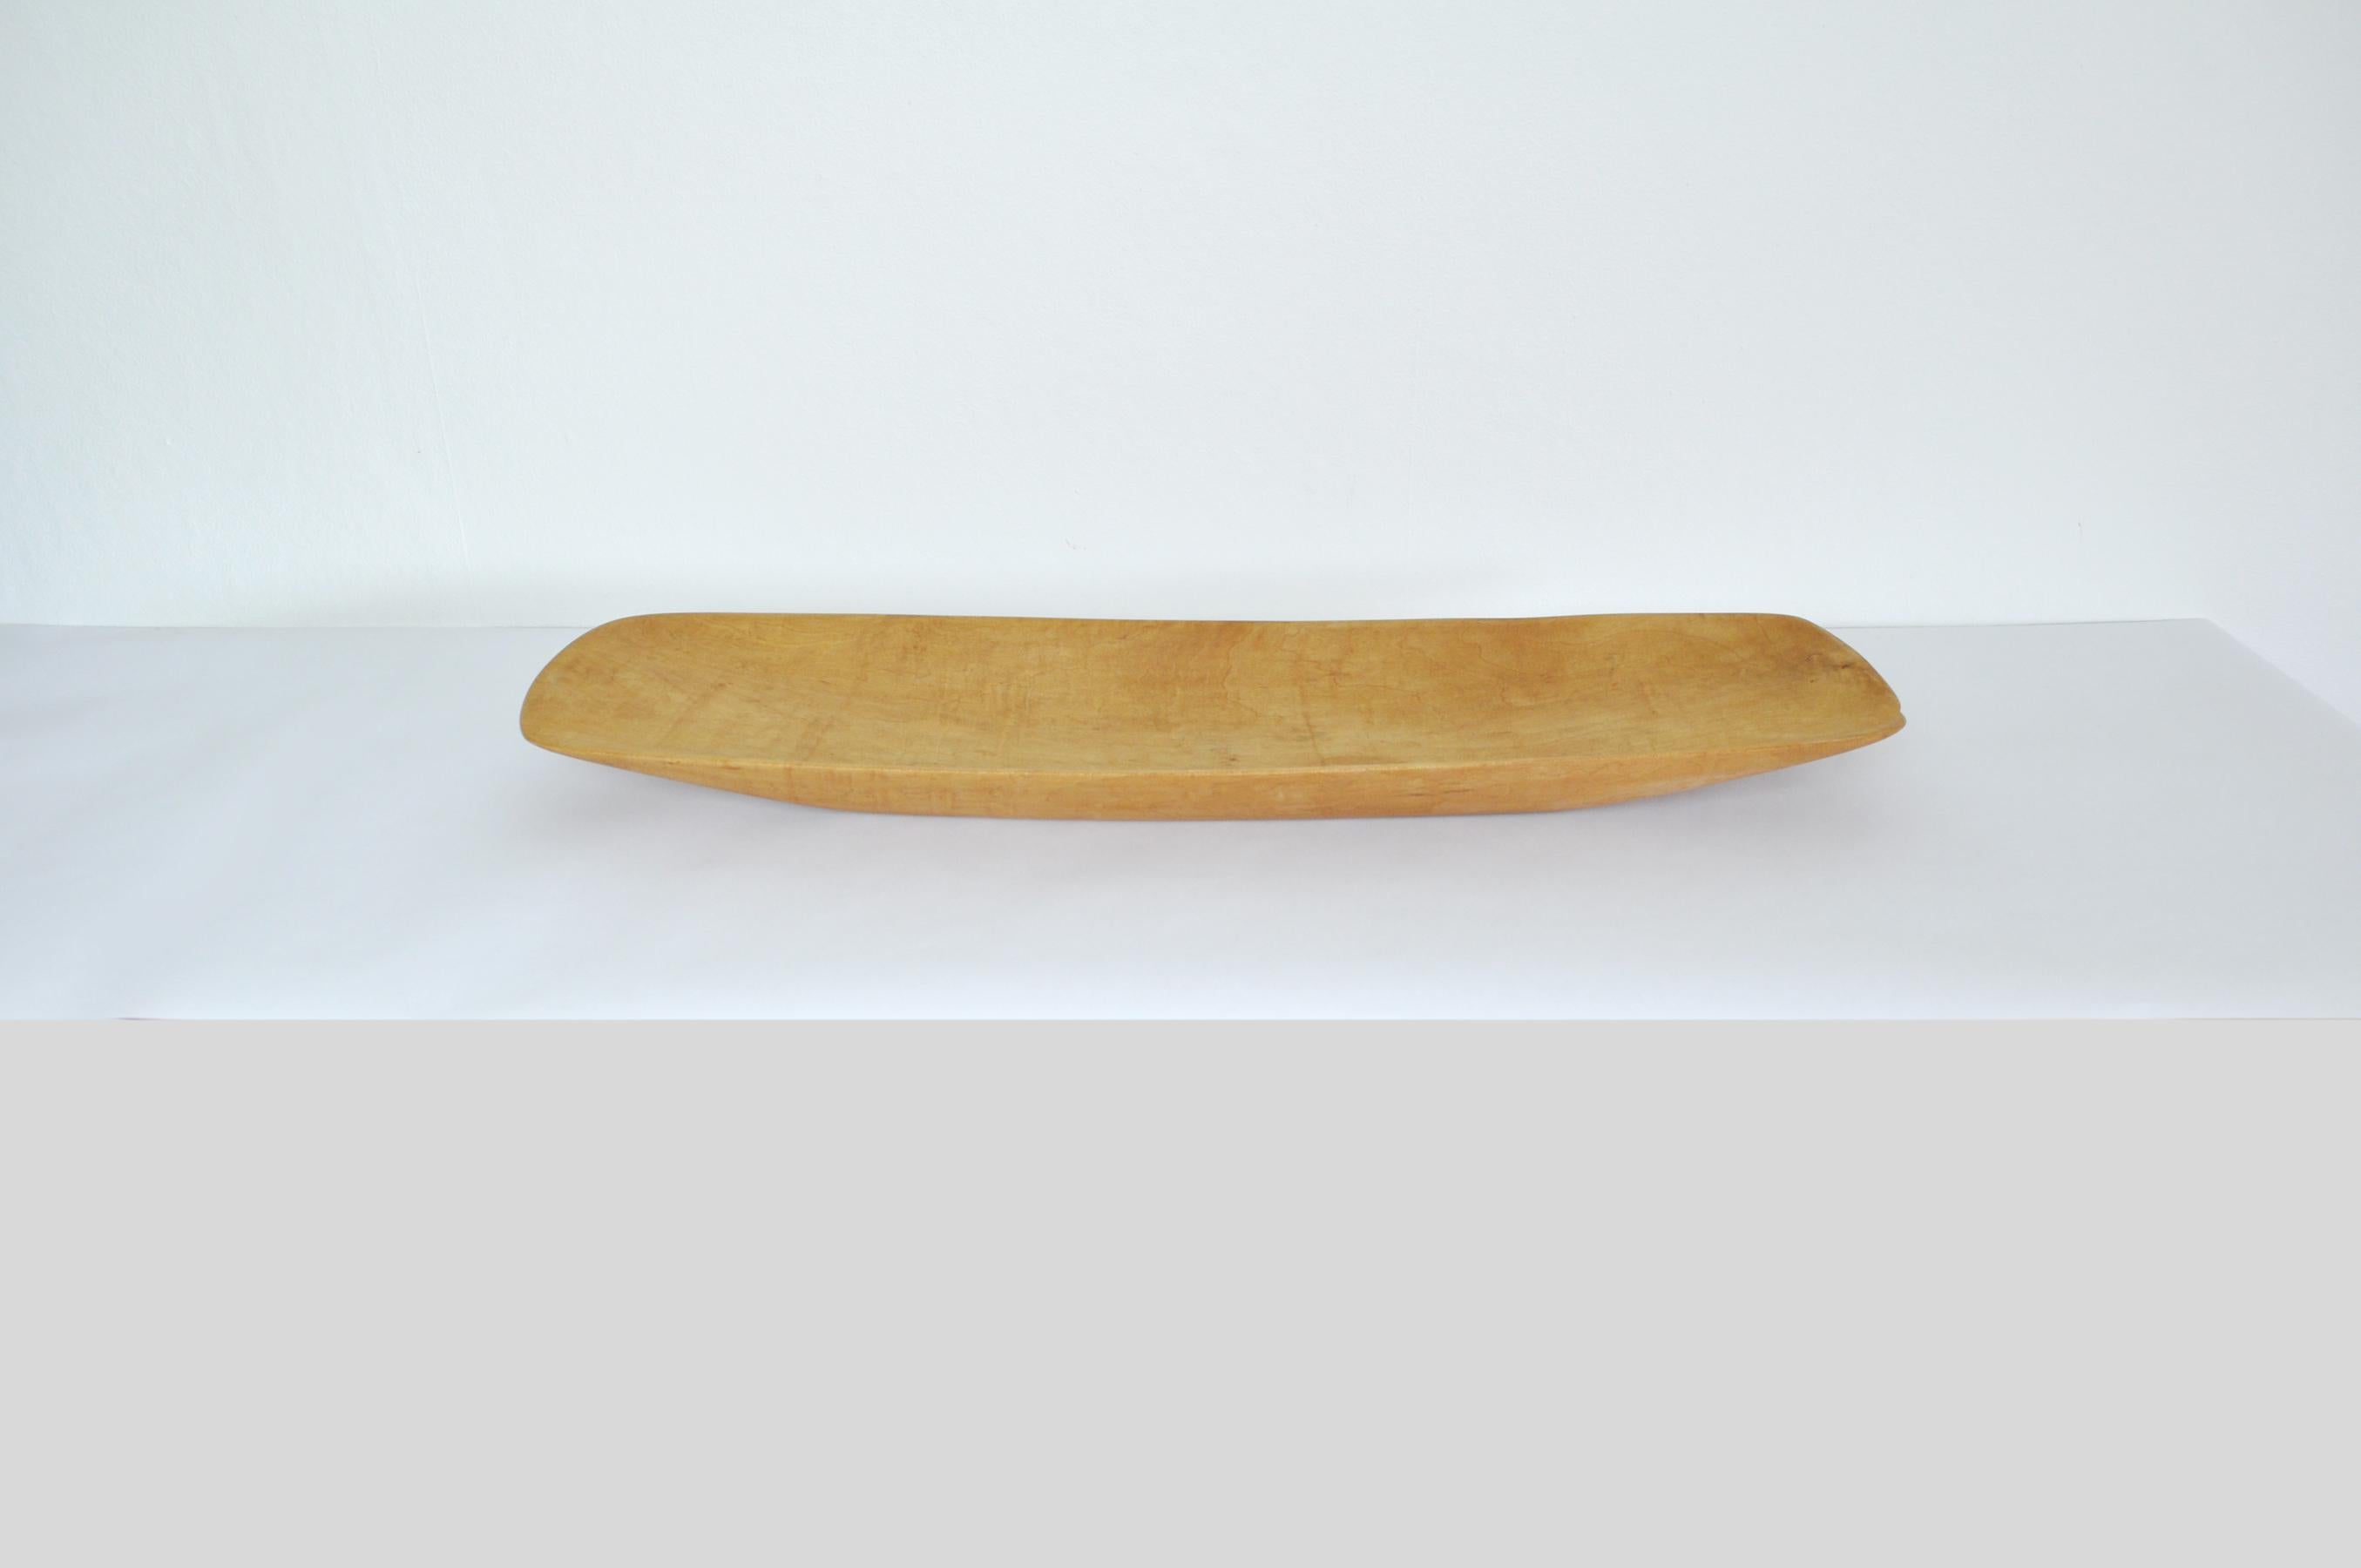 Handcrafted Danish Birch Dish with an Organic Design, 1960s For Sale 1